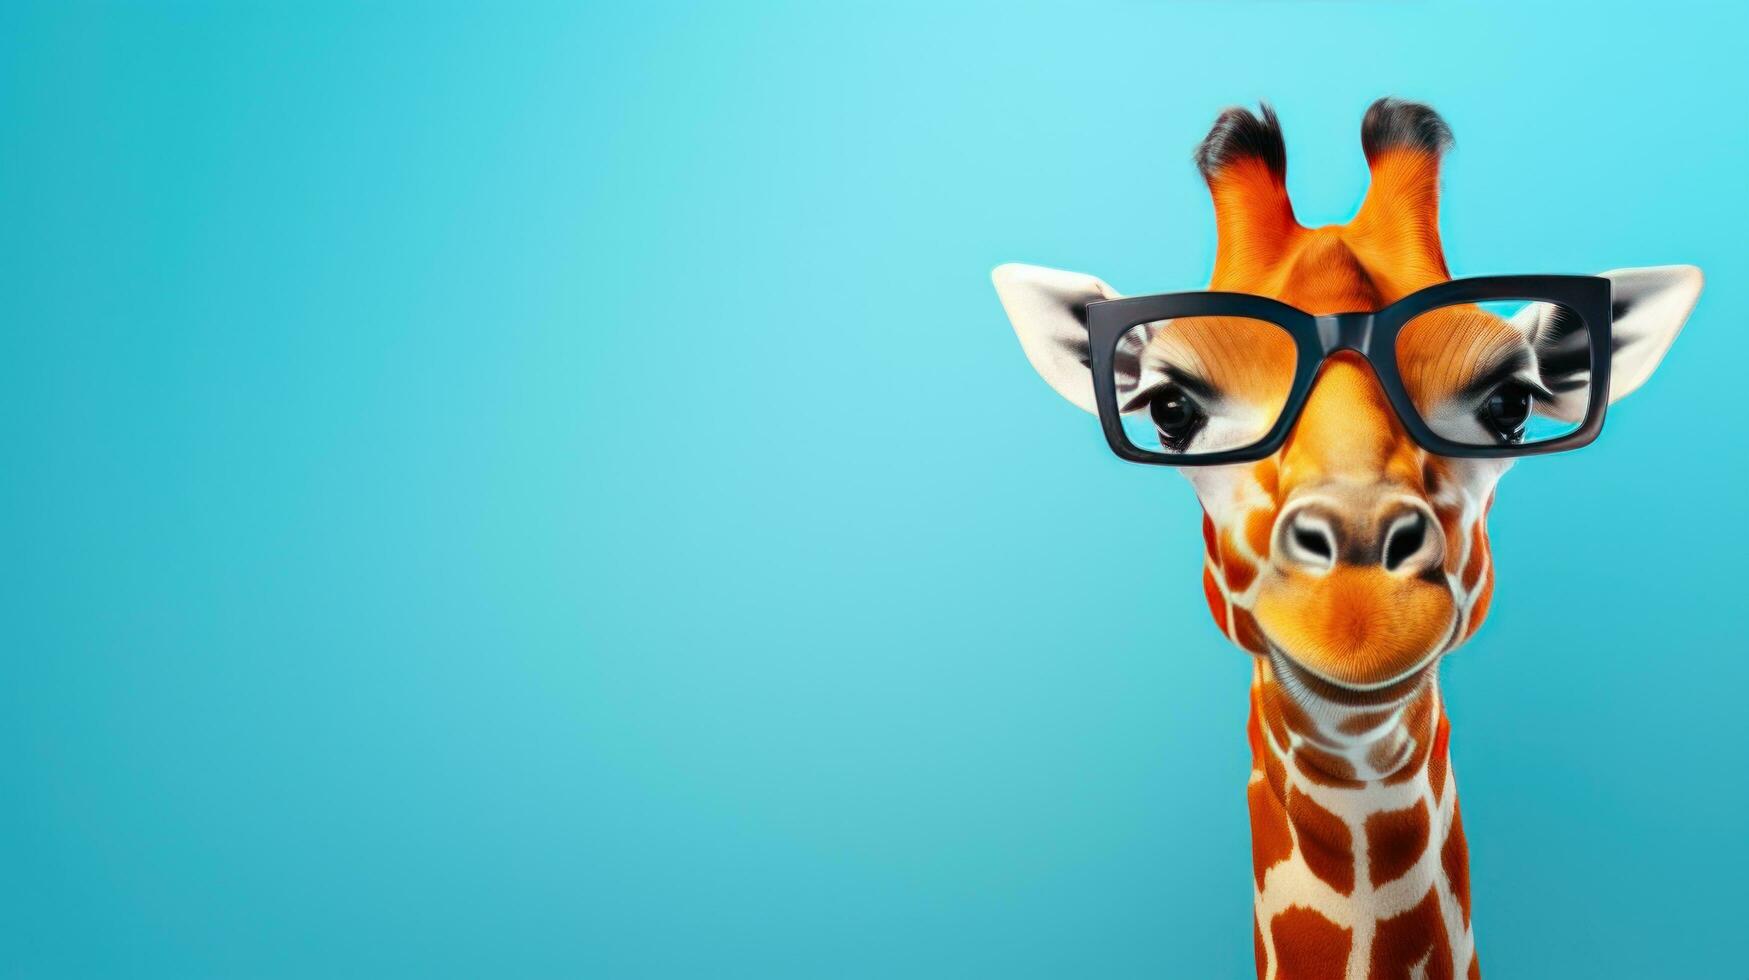 Giraffe wearing glasses on a solid color background photo